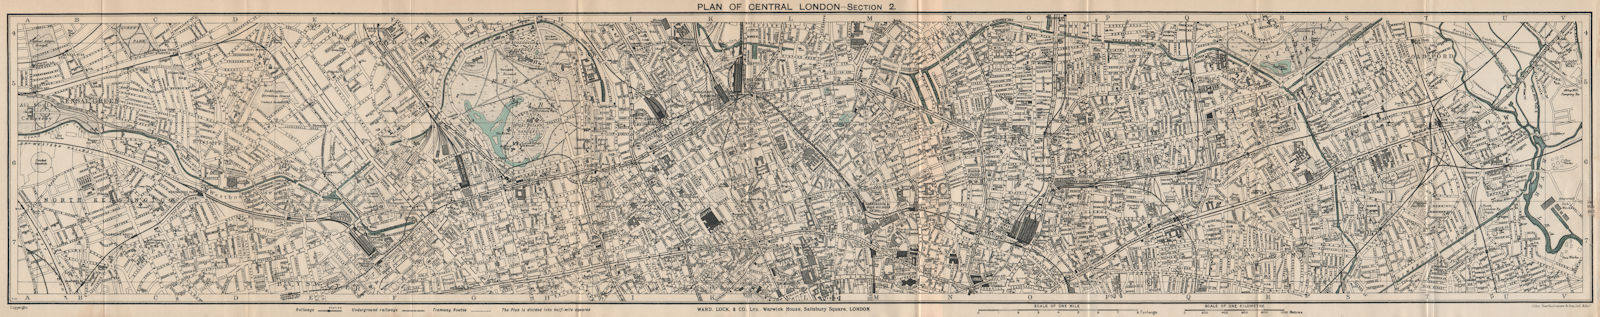 CENTRAL LONDON-SECTION 2 vintage town/city plan. London. WARD LOCK 1925 map